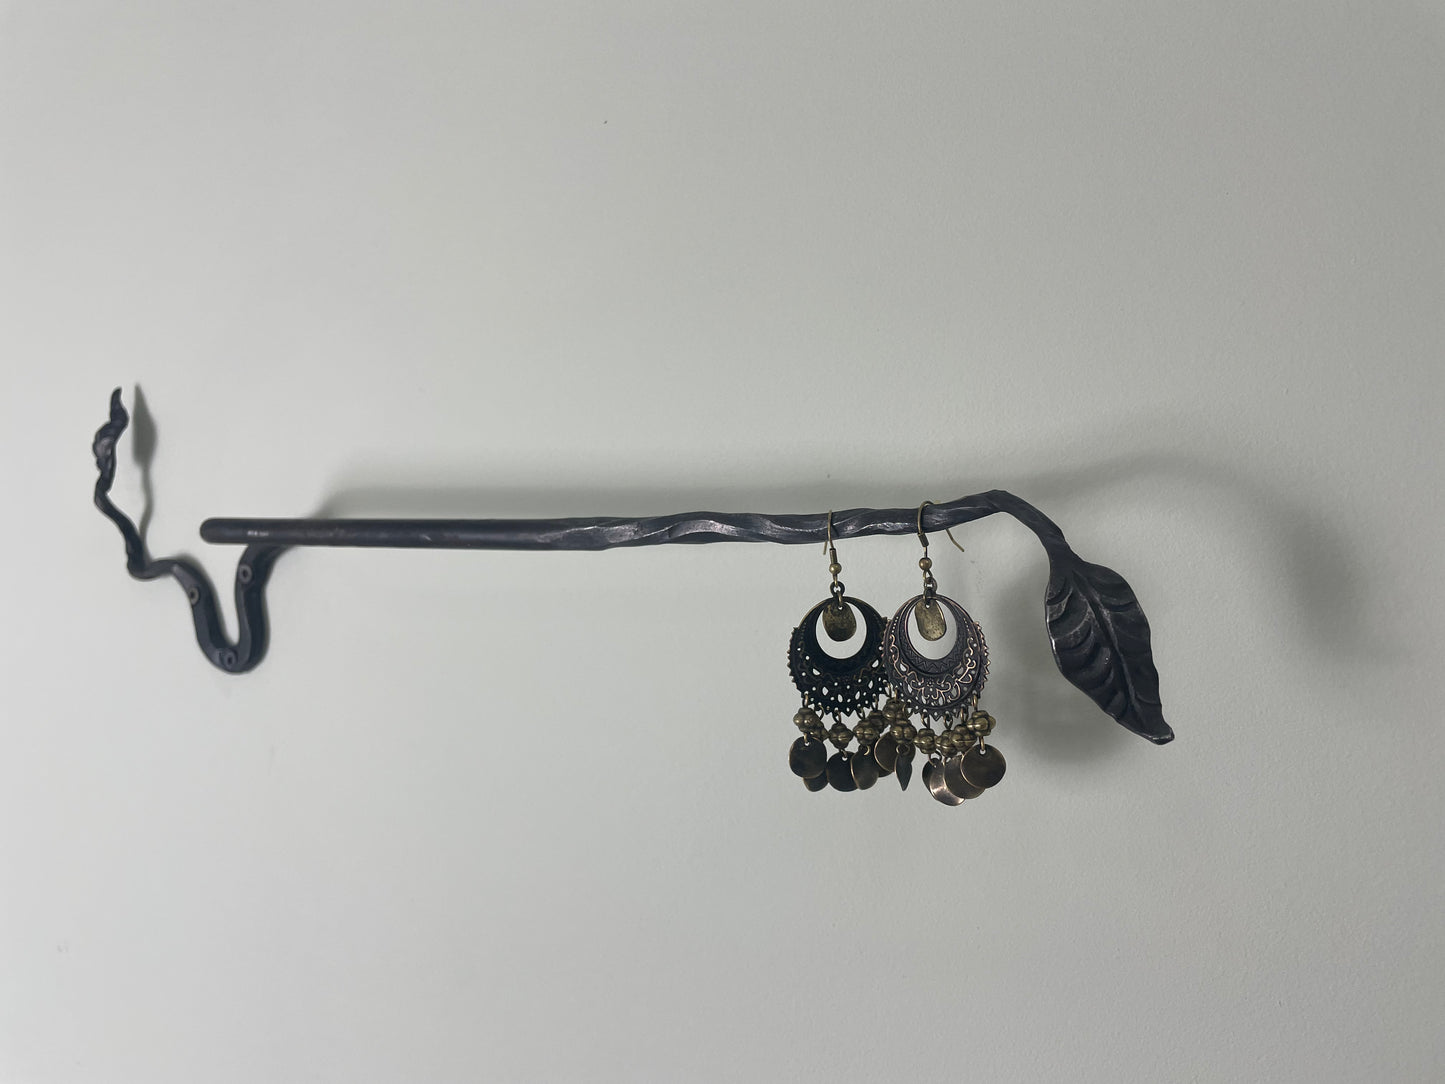 Forged Hand Towel Holder - Pike Lake Forge